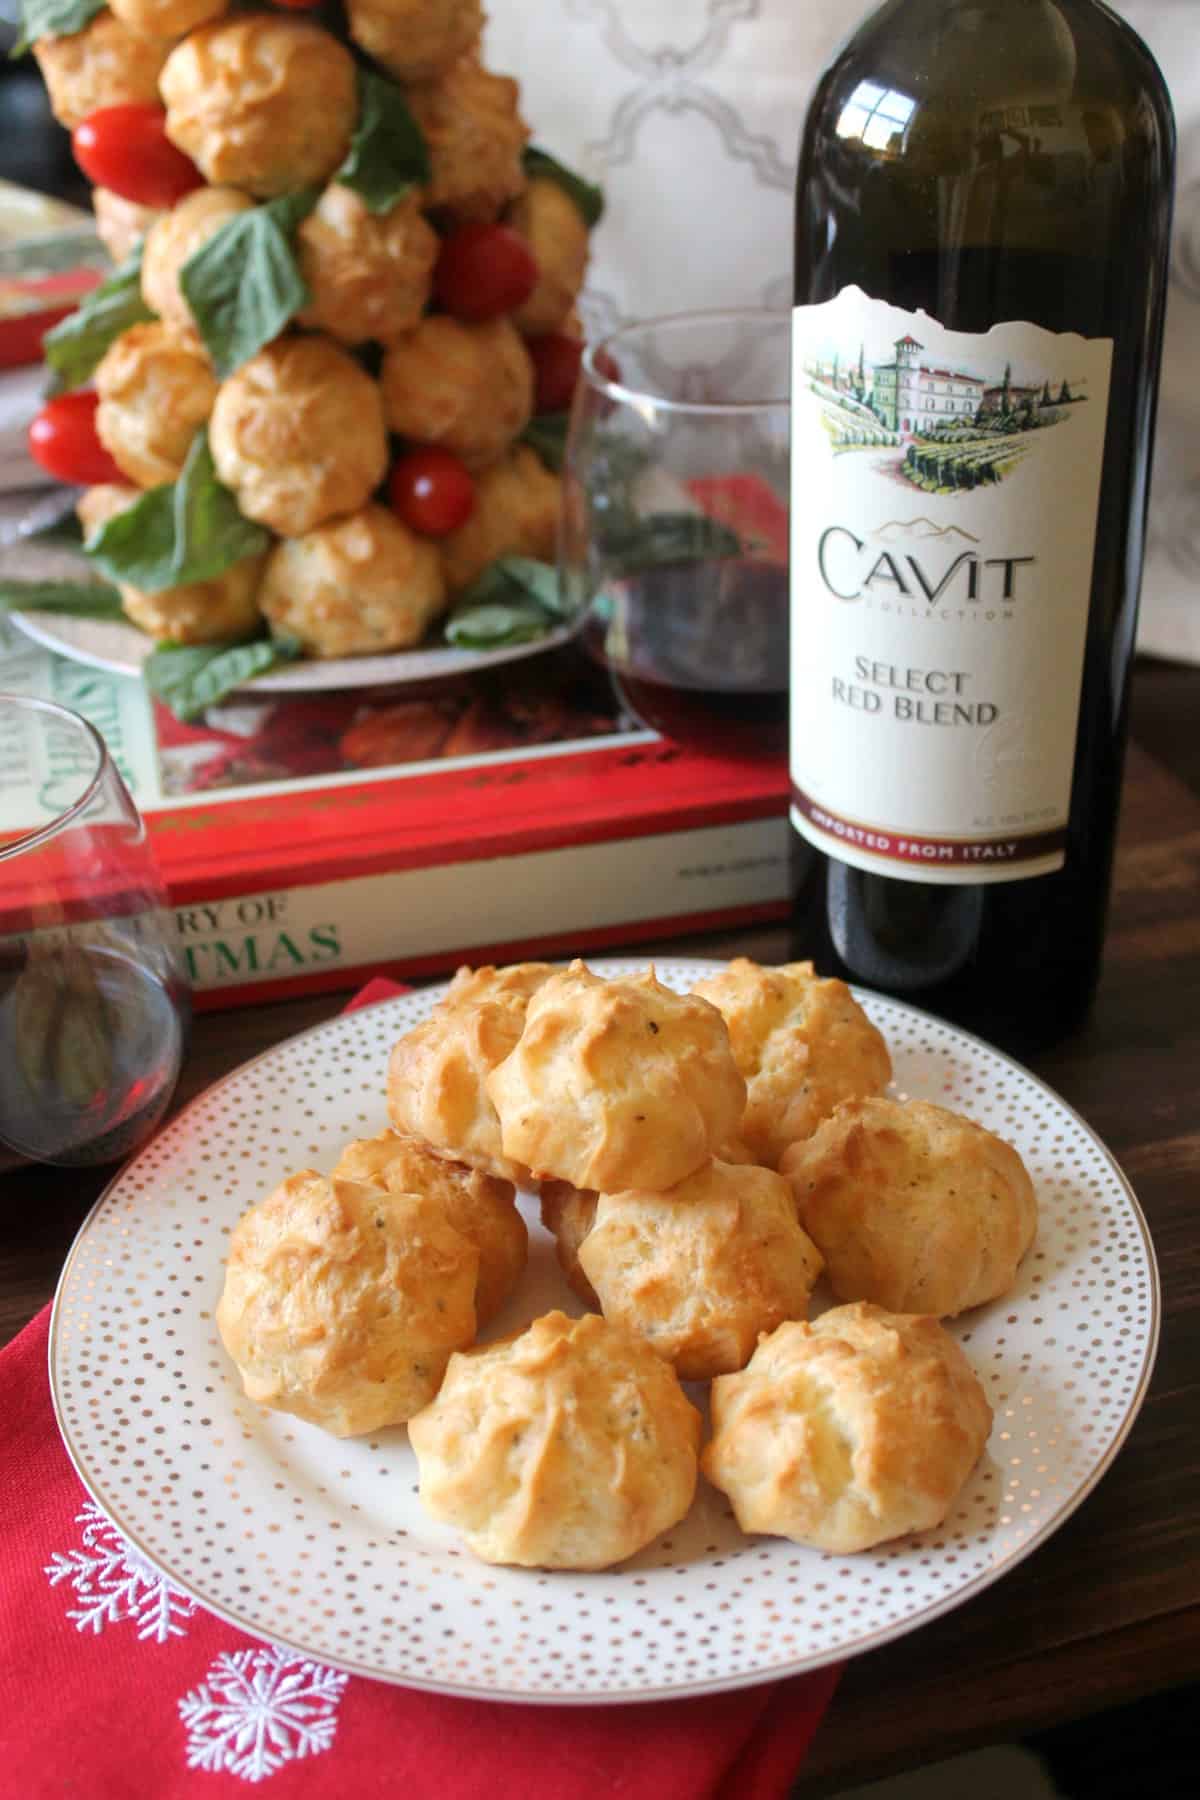 Italian Cheese Puffs. Light, airy and full of flavor, these cheese puffs make a wonderful appetizer. Serve alongside Cavit Wine for an elegant party bite!